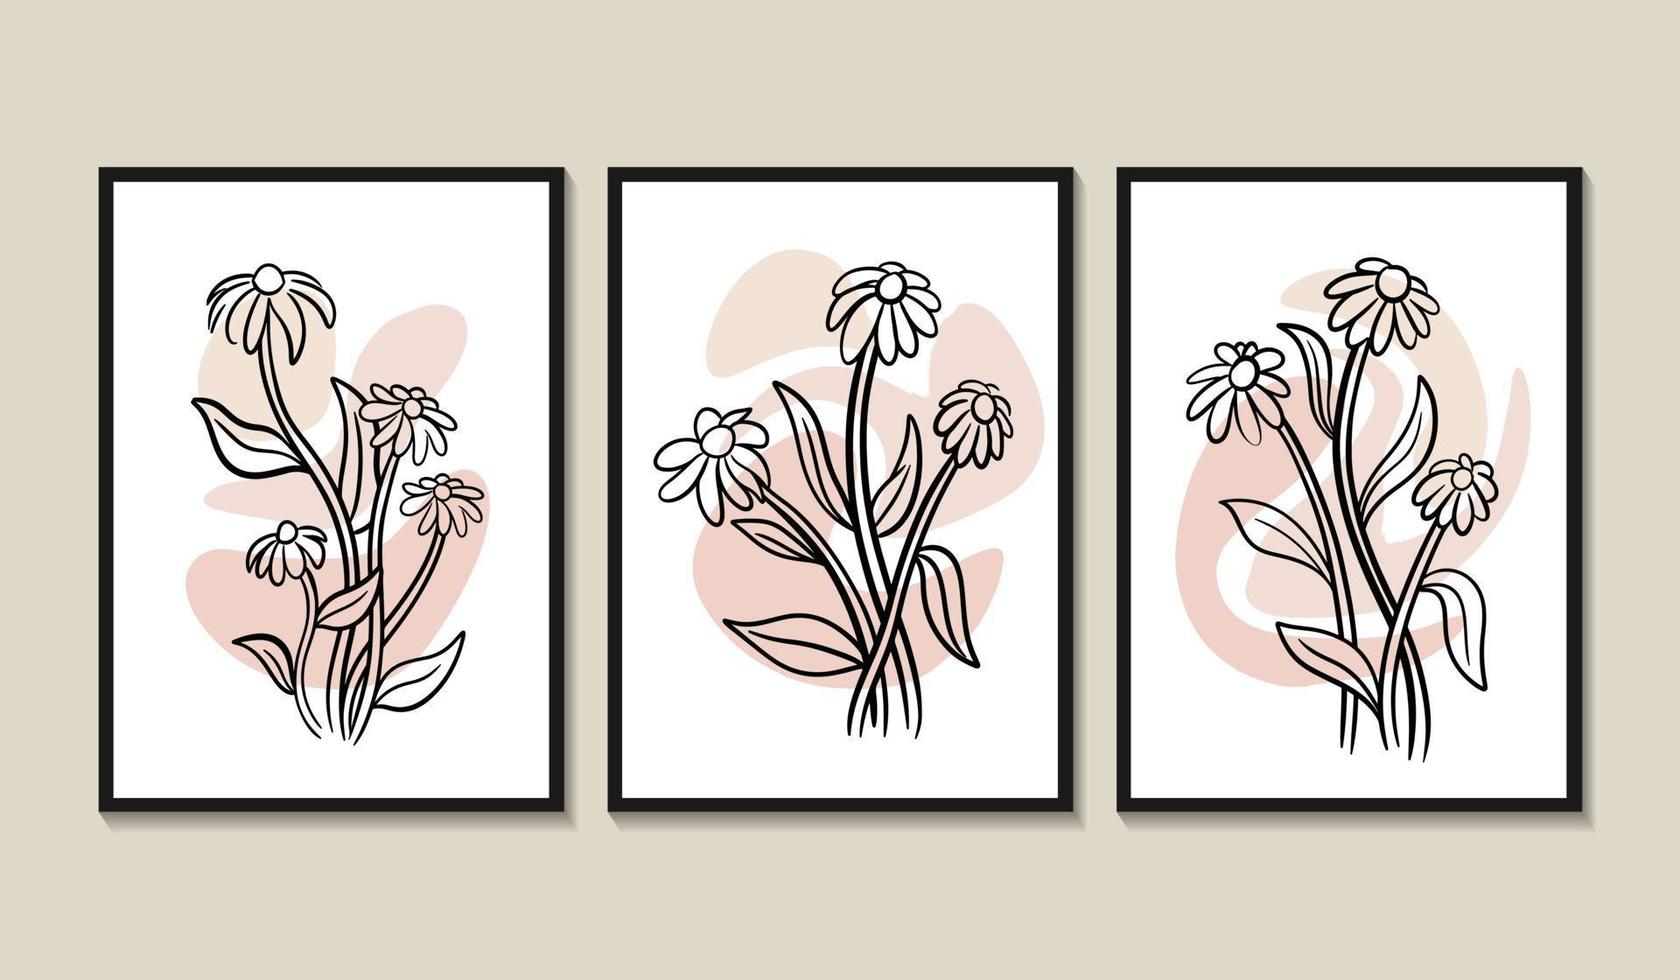 Minimal line art flowers and leaves poster design vector